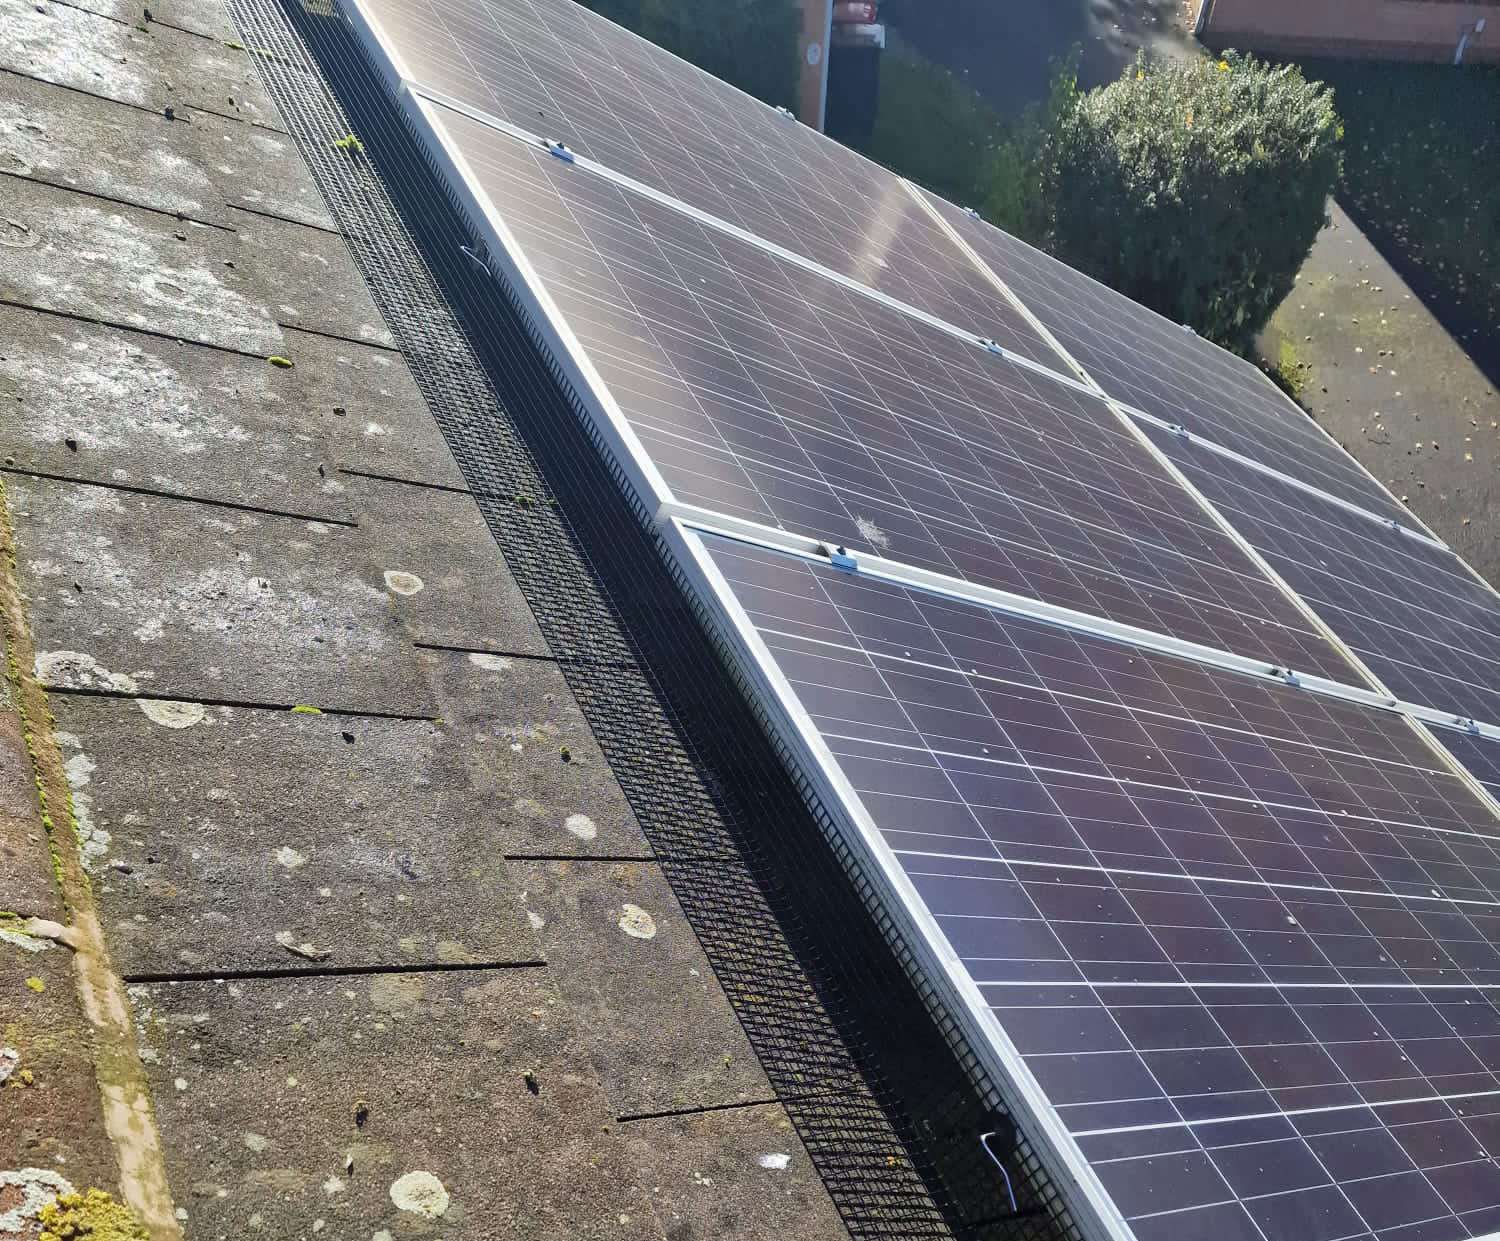 Pigeon+proofing+solar+panels+in+Toton